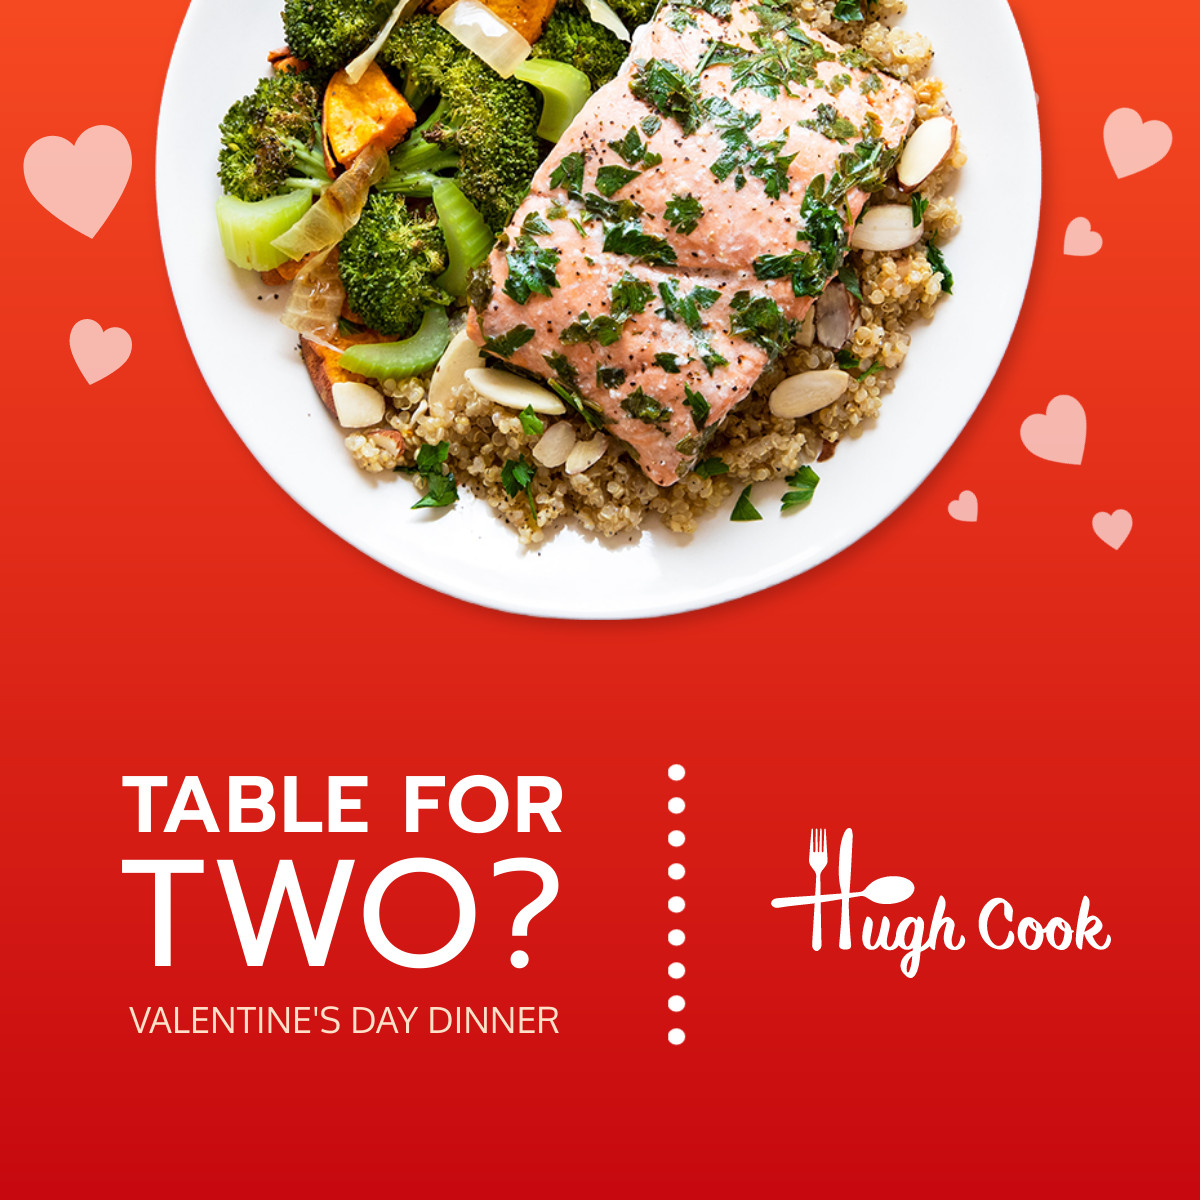 Table For Two on Valentine's Day